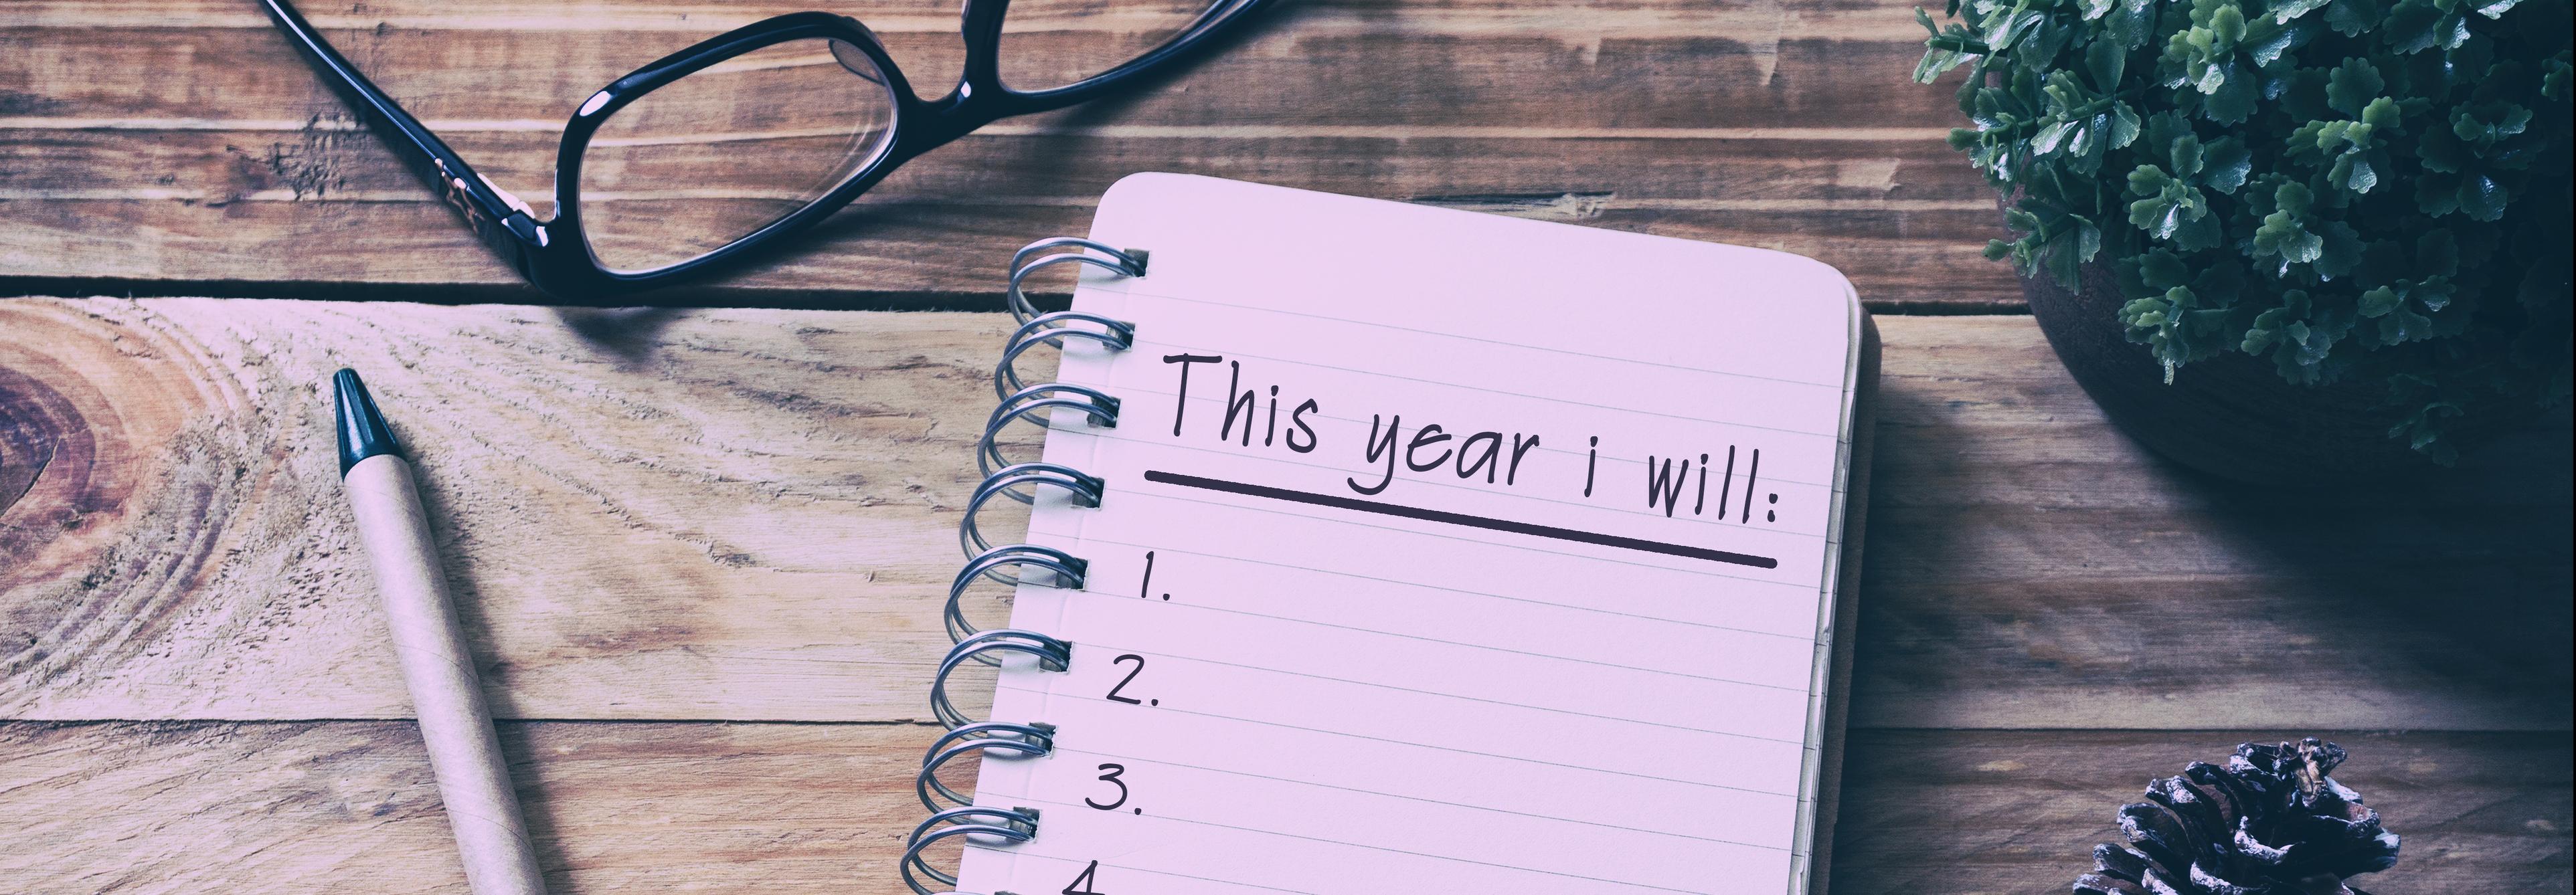 To do list for coming year